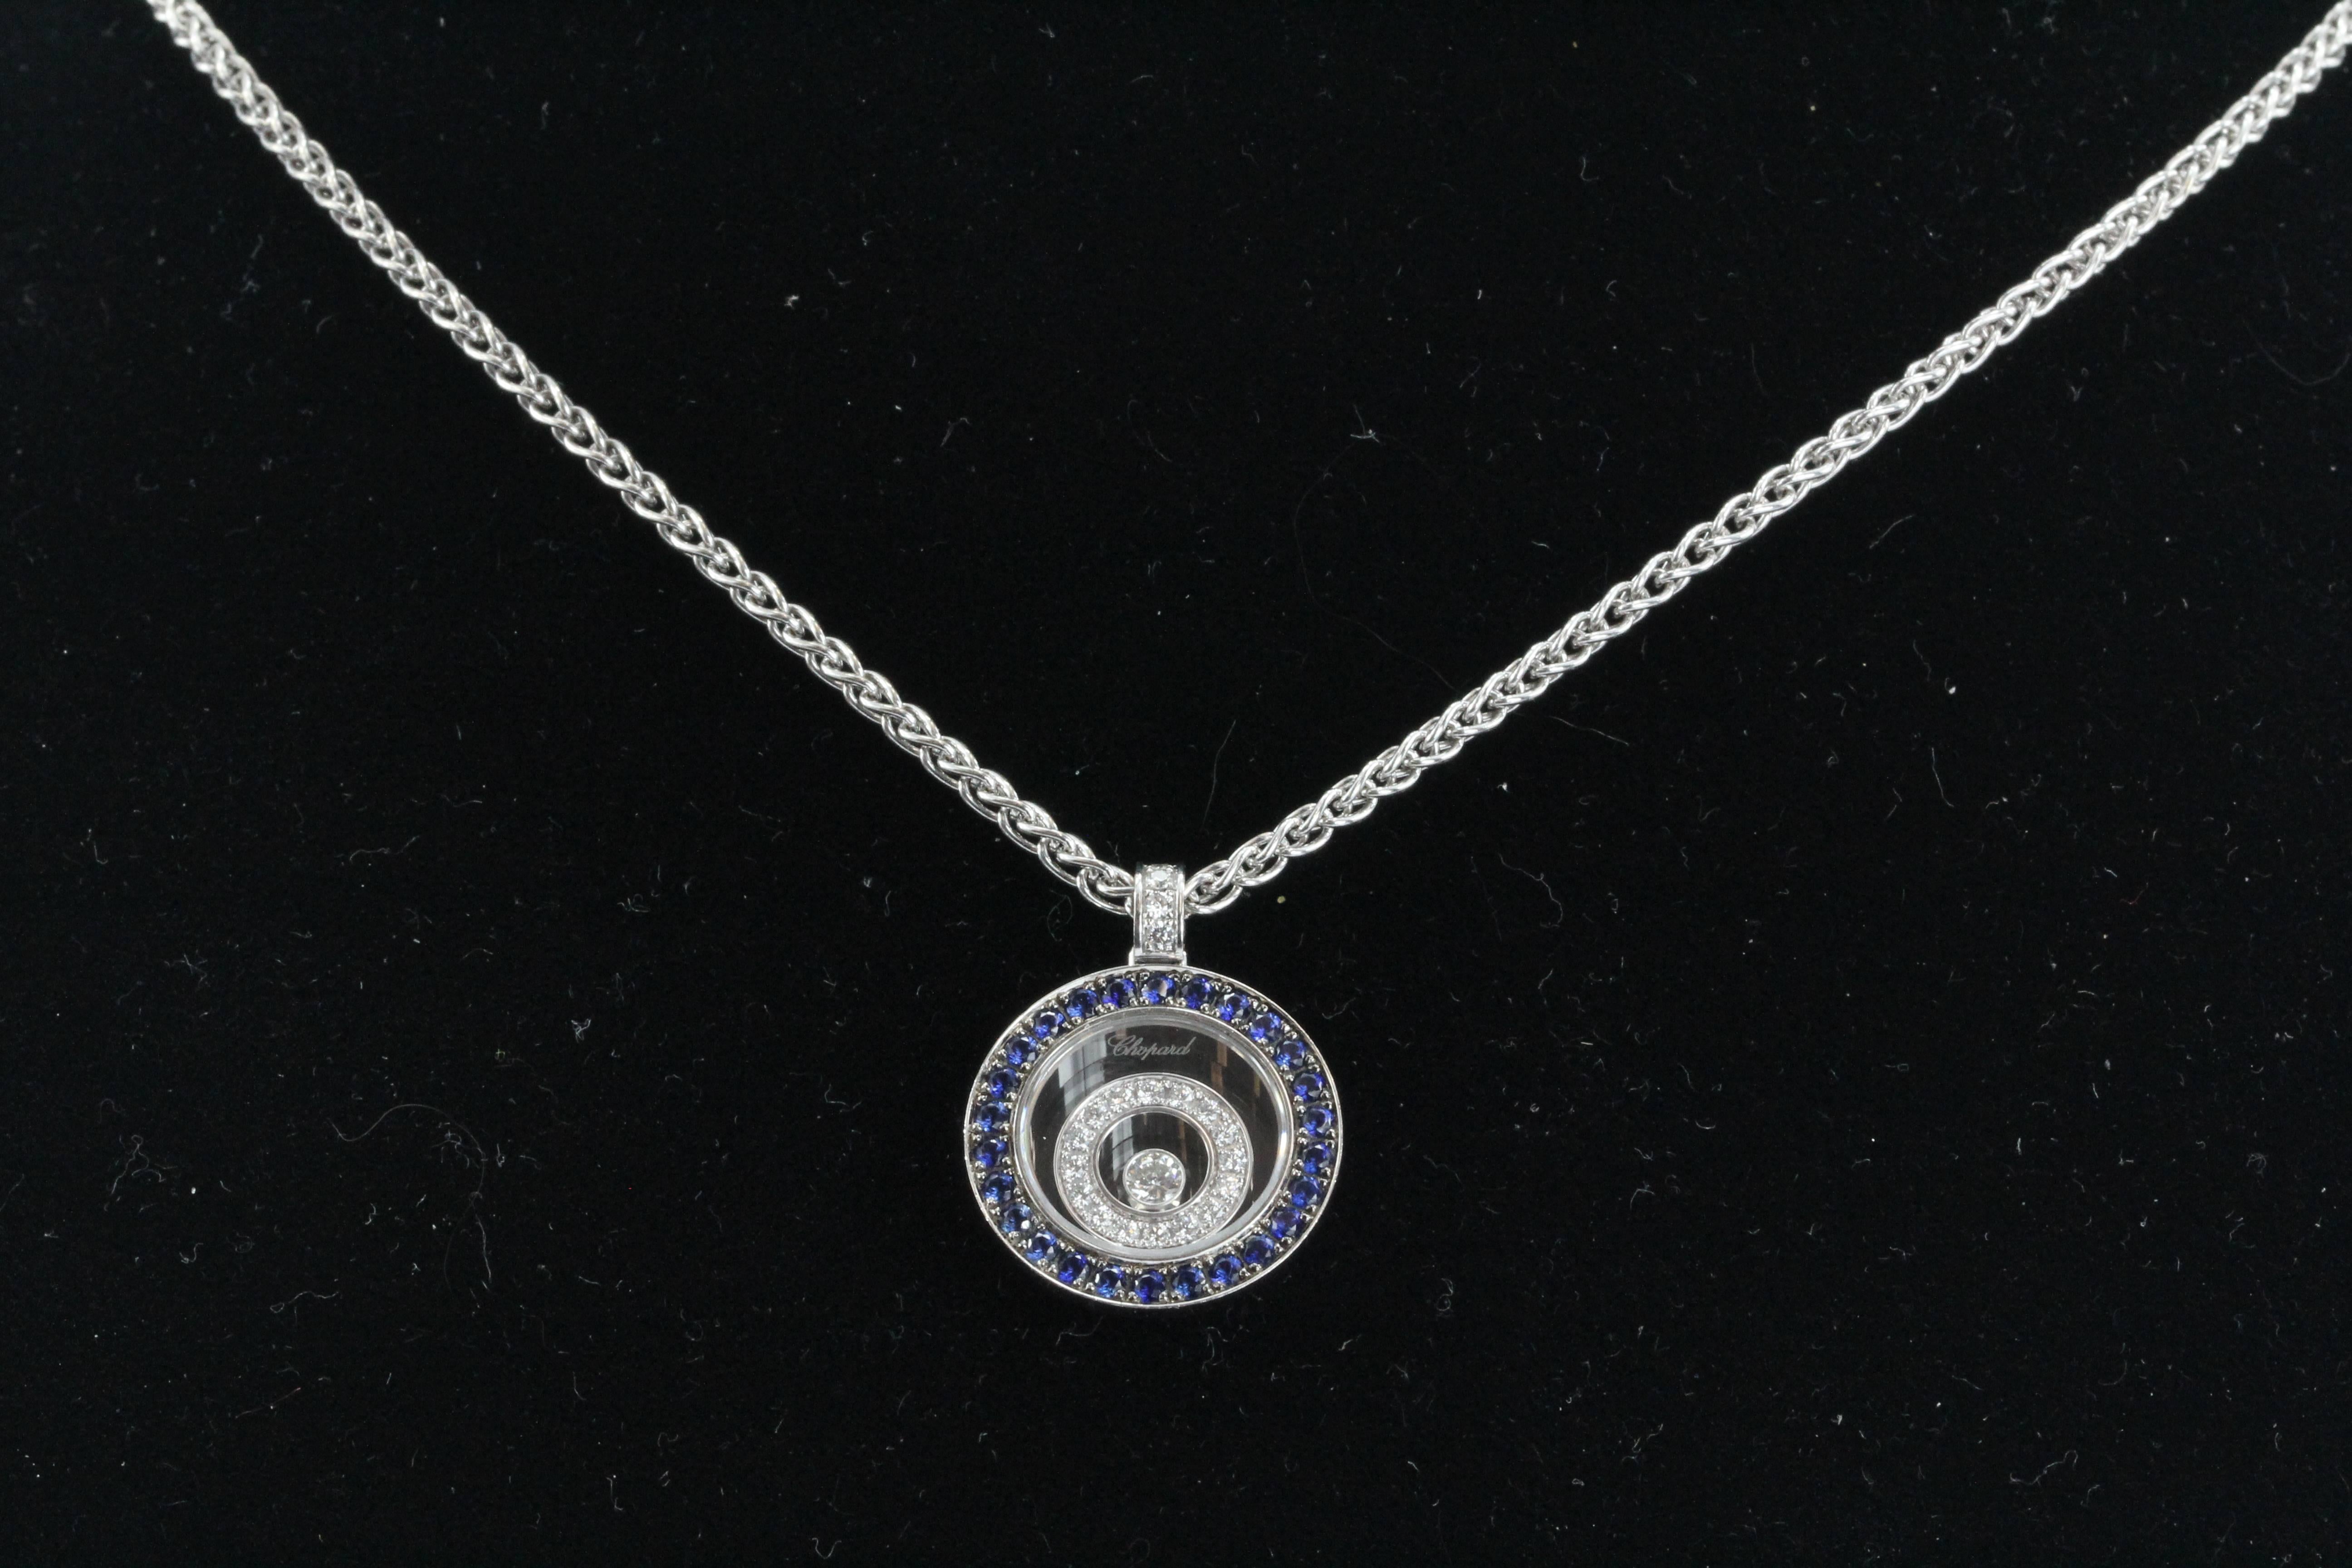 Extremely rare limited production retired Chopard Happy Spirit Pendant with Diamonds and Sapphires.

Model number = 79/5422/3-20

Originally retailed 15 years ago for $8,660

Specifications:
18kt White Gold Chopard Pendant
26 sapphires =